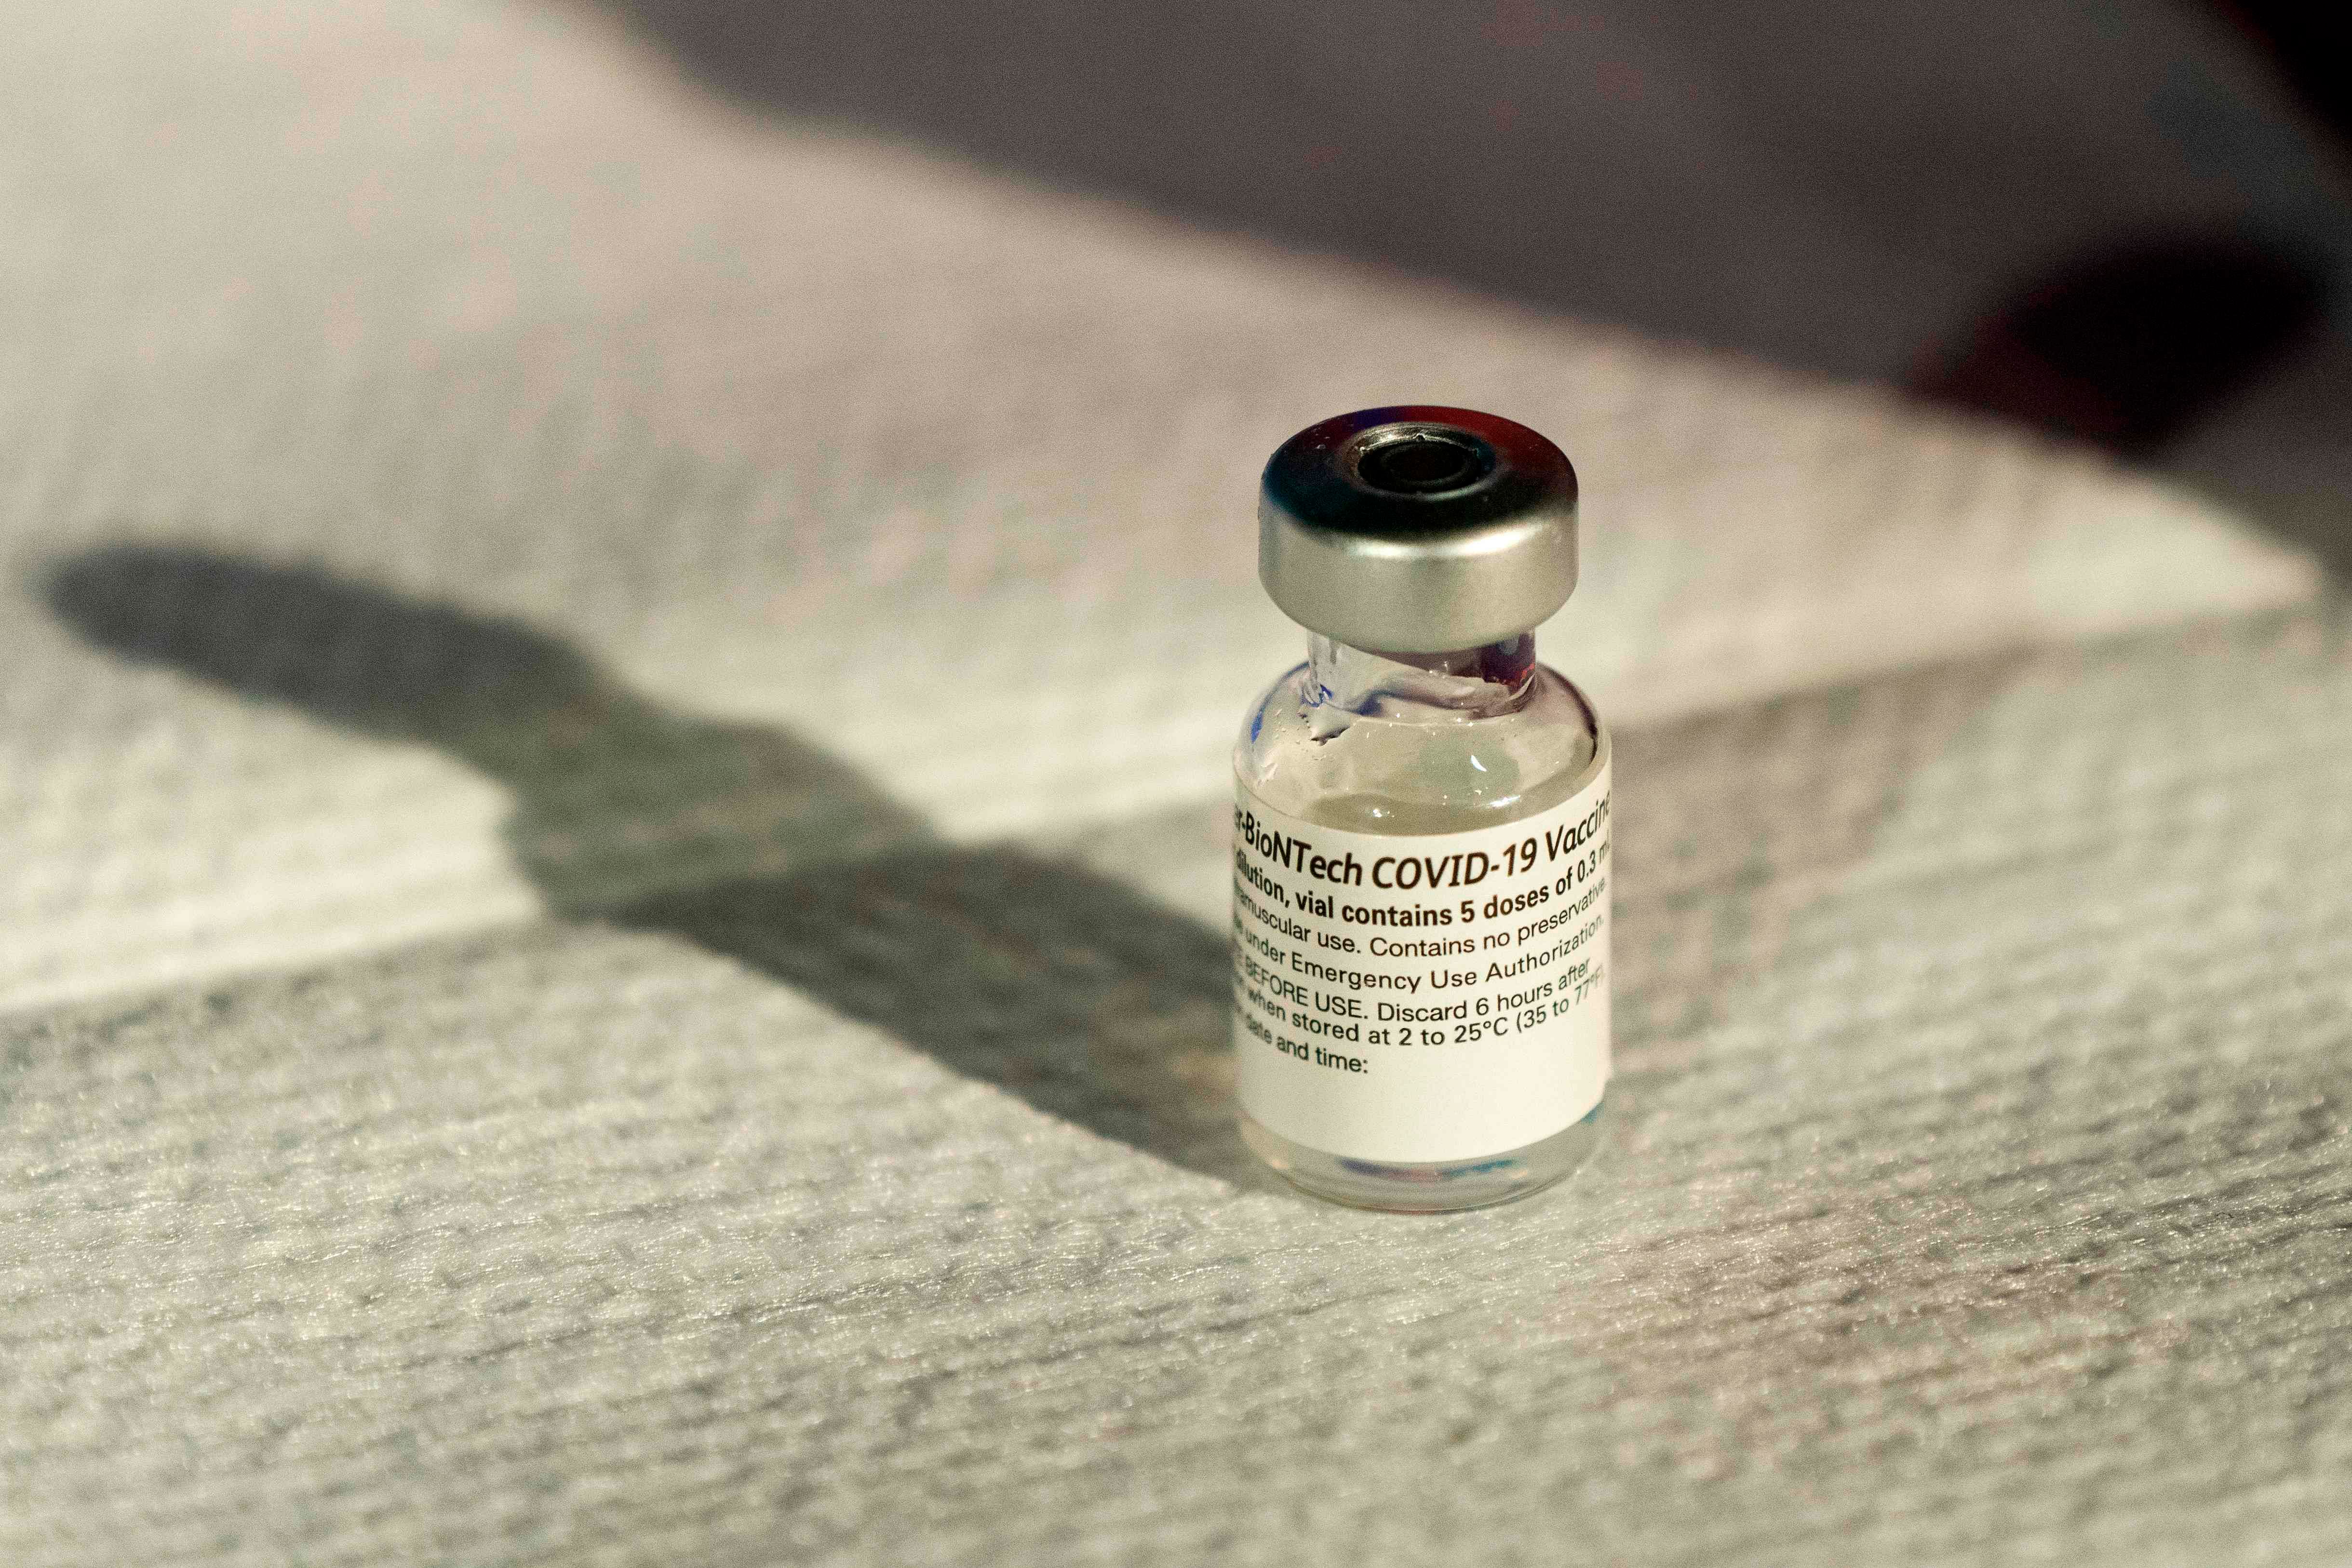 Vaccines have unquestionably been society’s most potent weapon against viral diseases of medical importance. Credit: AFP Photo